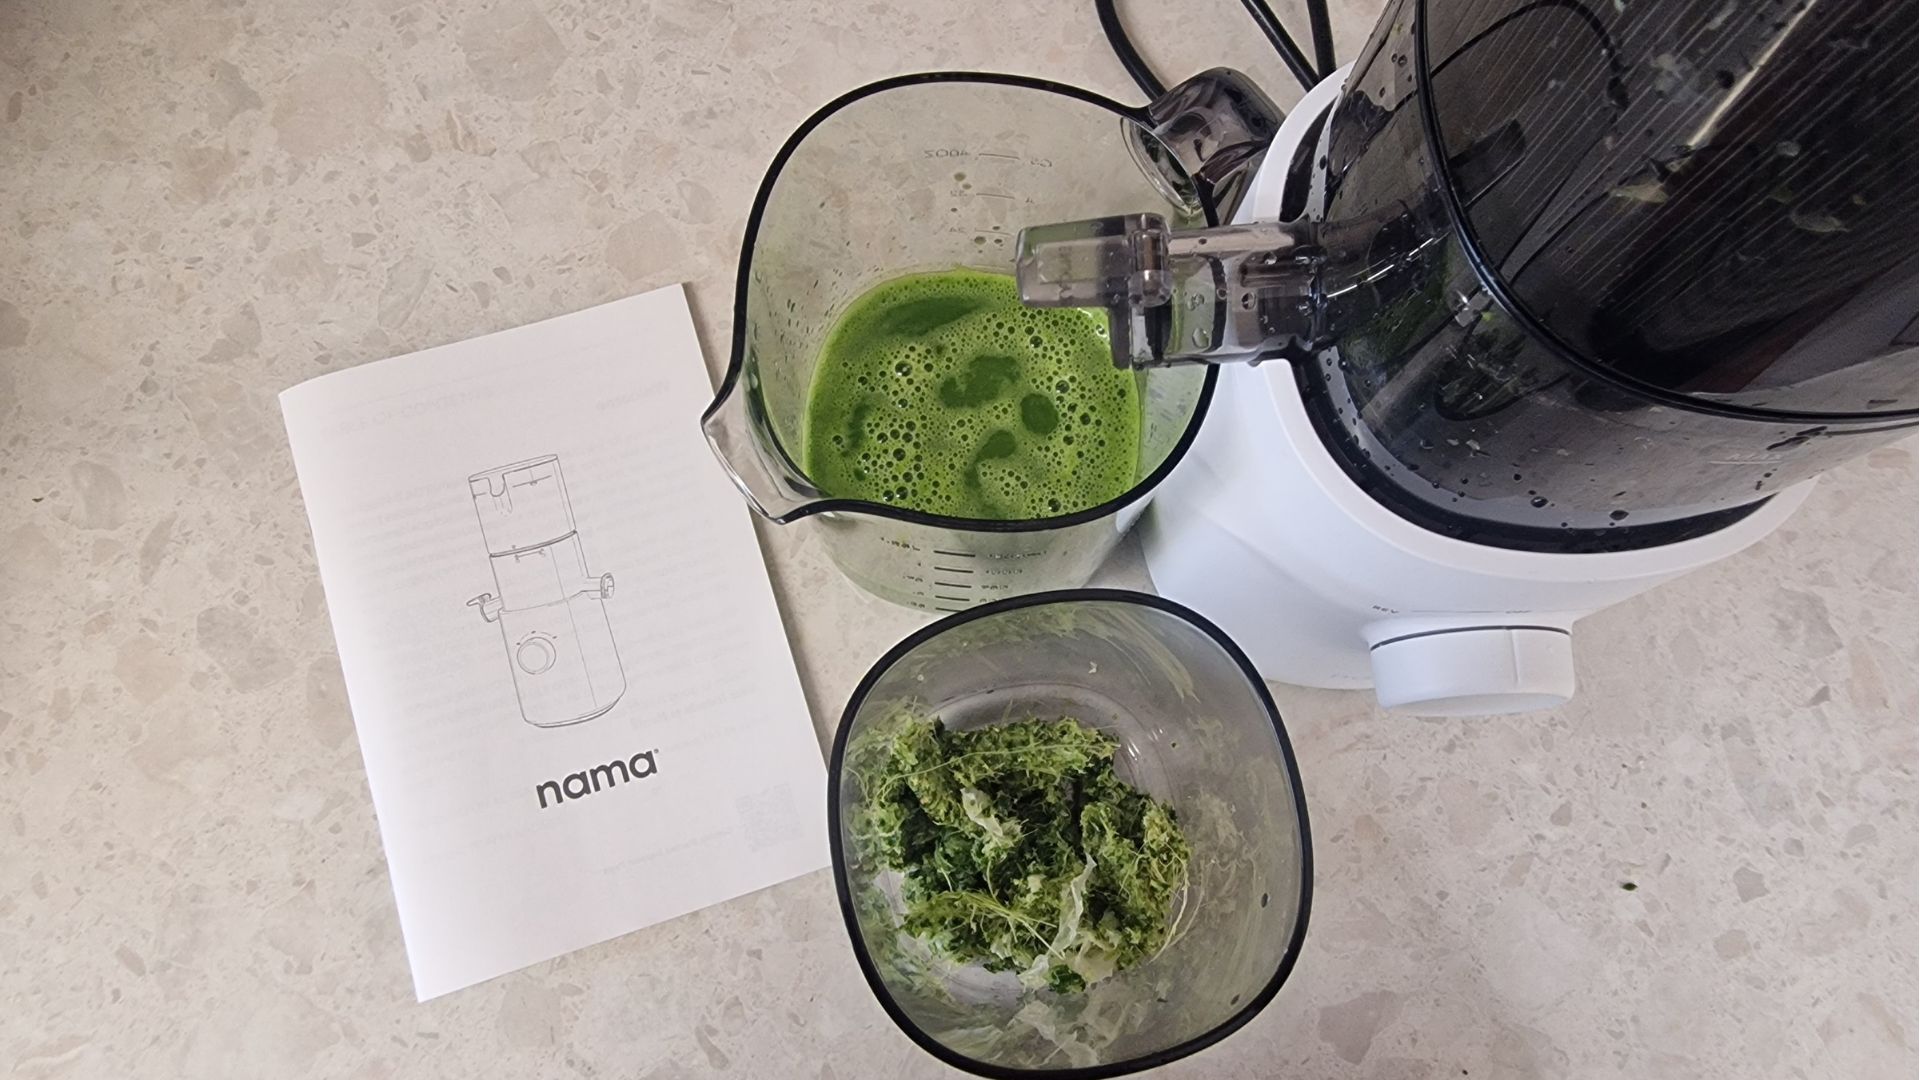 An overhead view of the green juice and pulp from the Nama J3 juicer